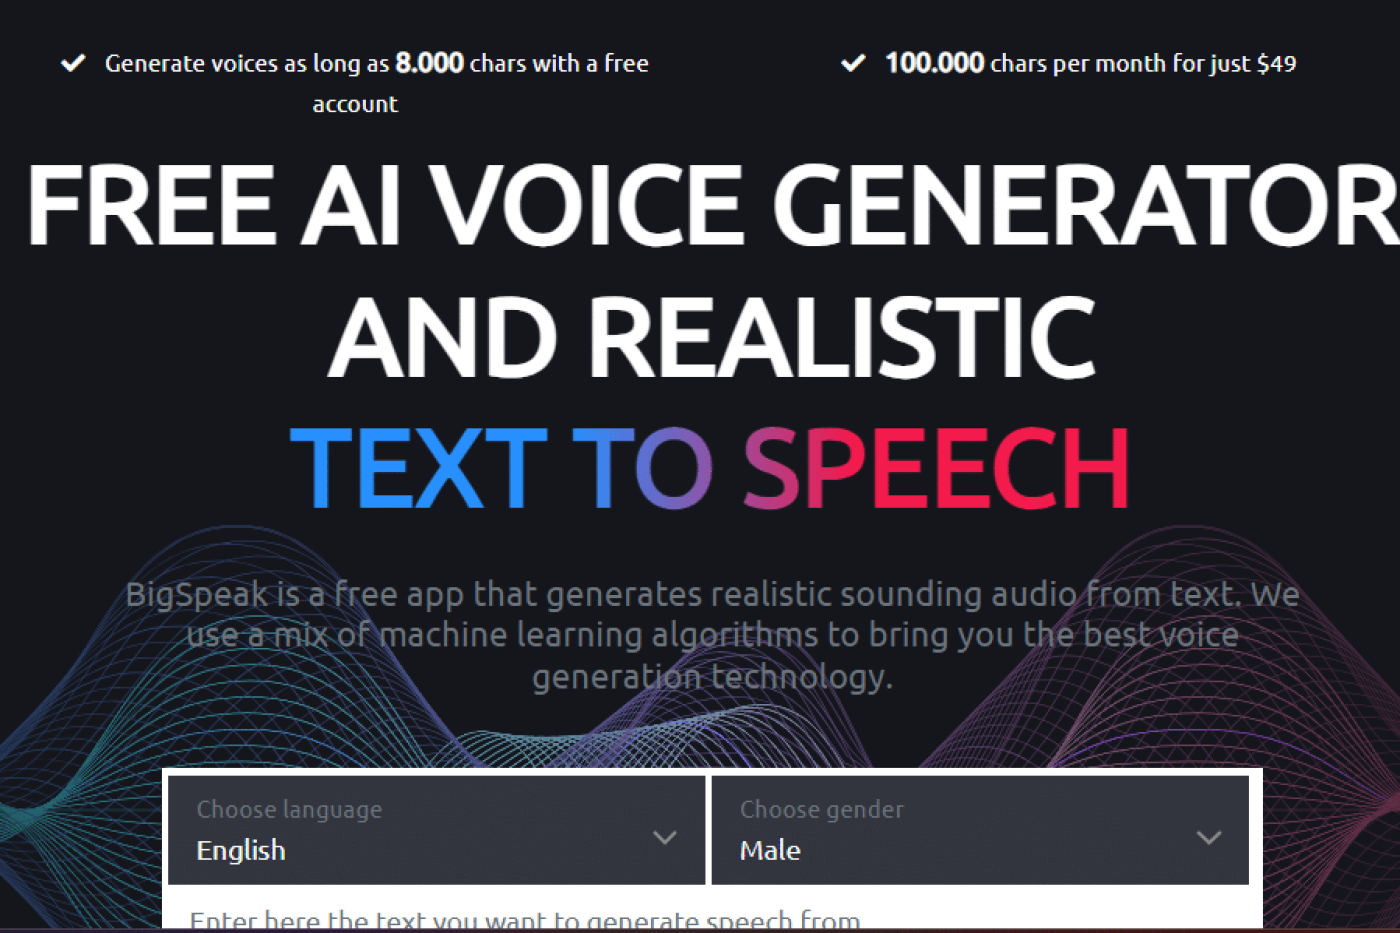 How BigSpeak AI Will Convert High Quality Audio To Text